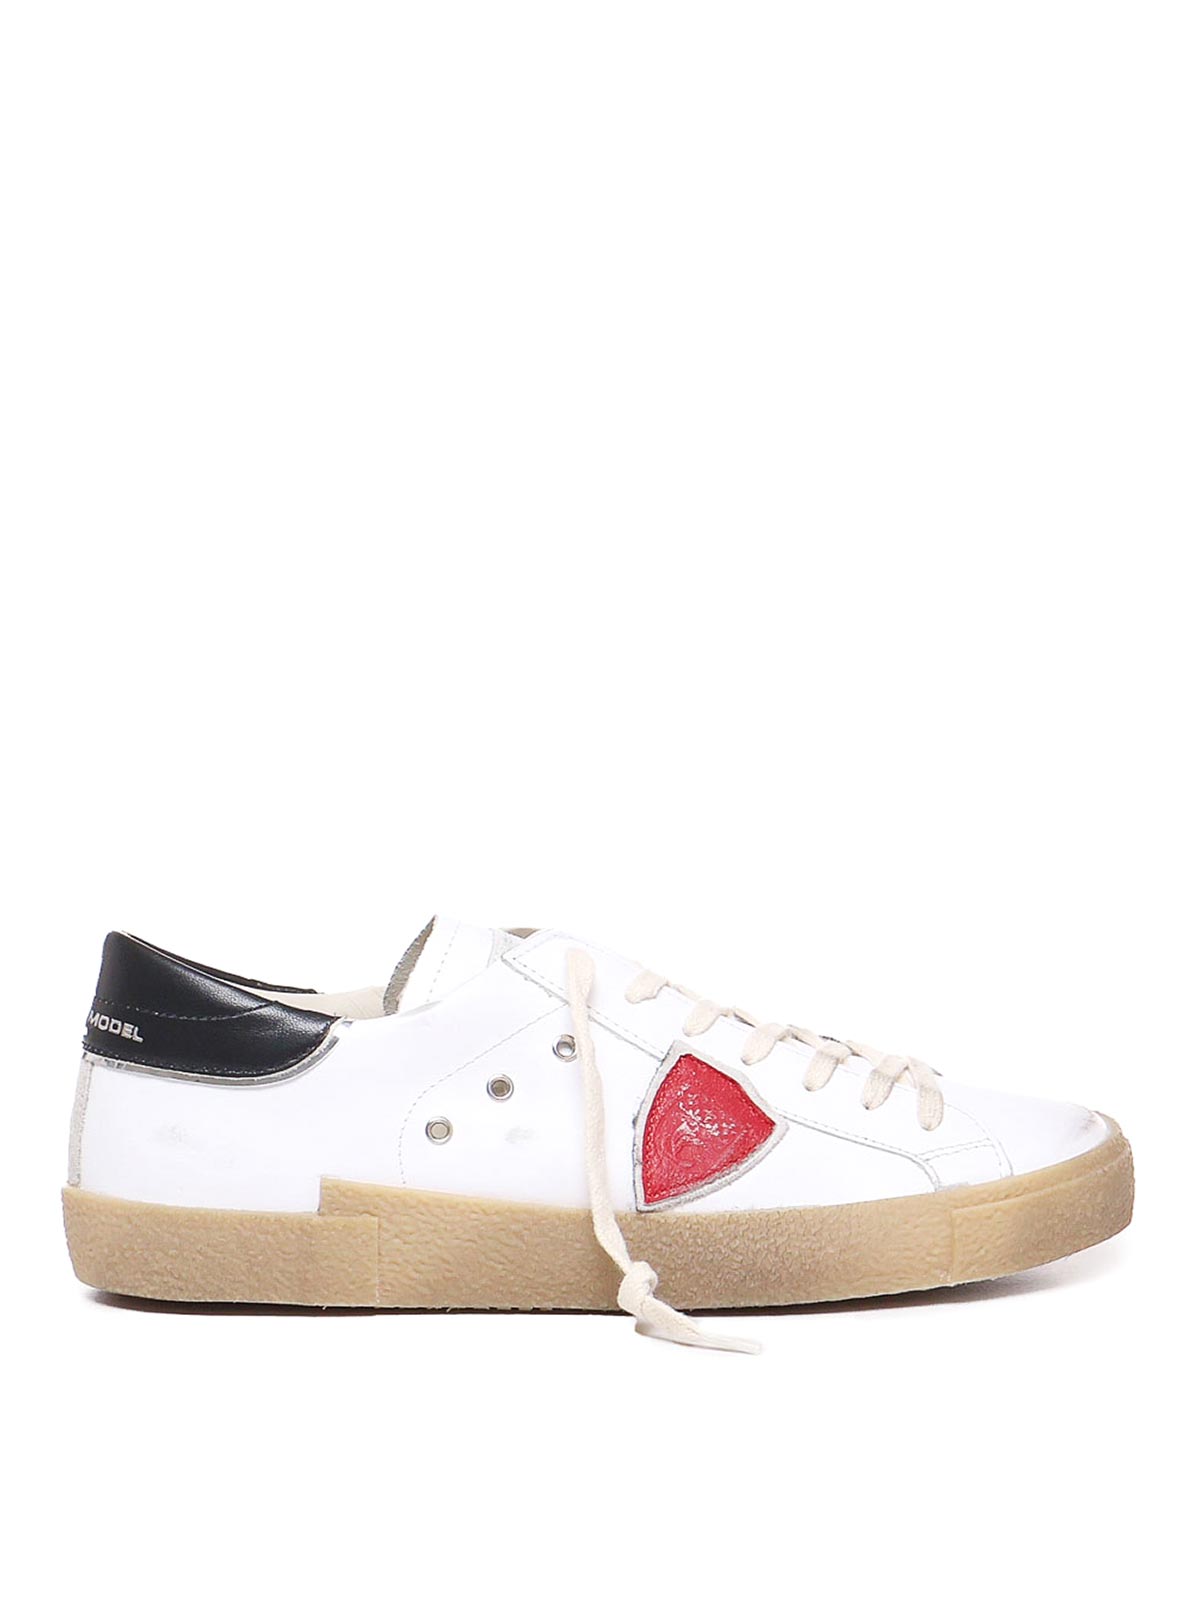 Philippe Model Distressed White Shoes